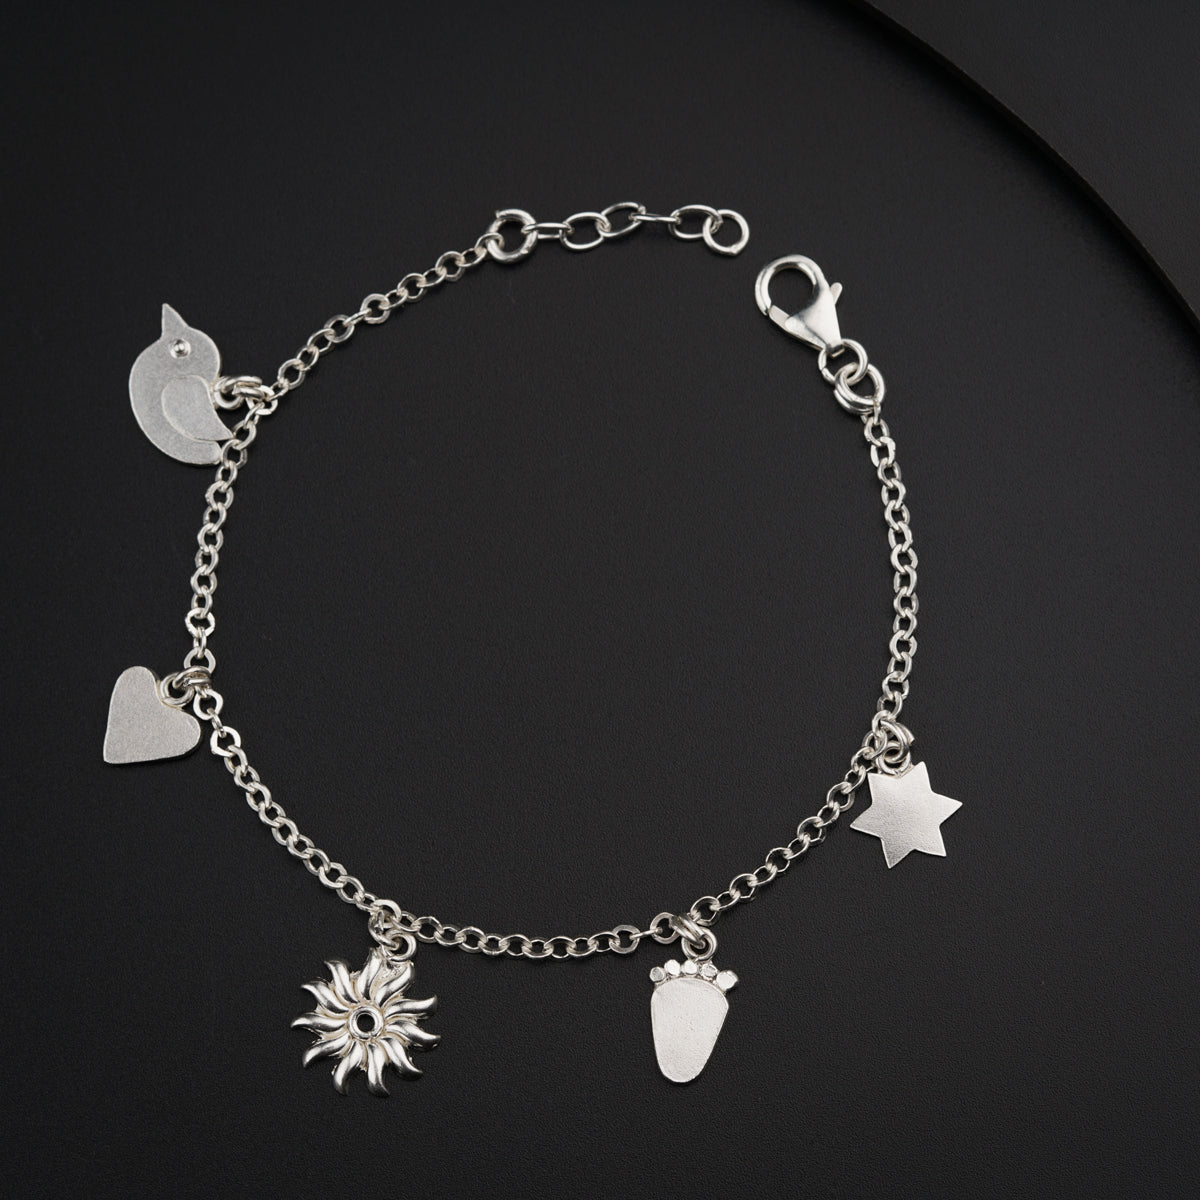 a silver bracelet with charms on a black surface